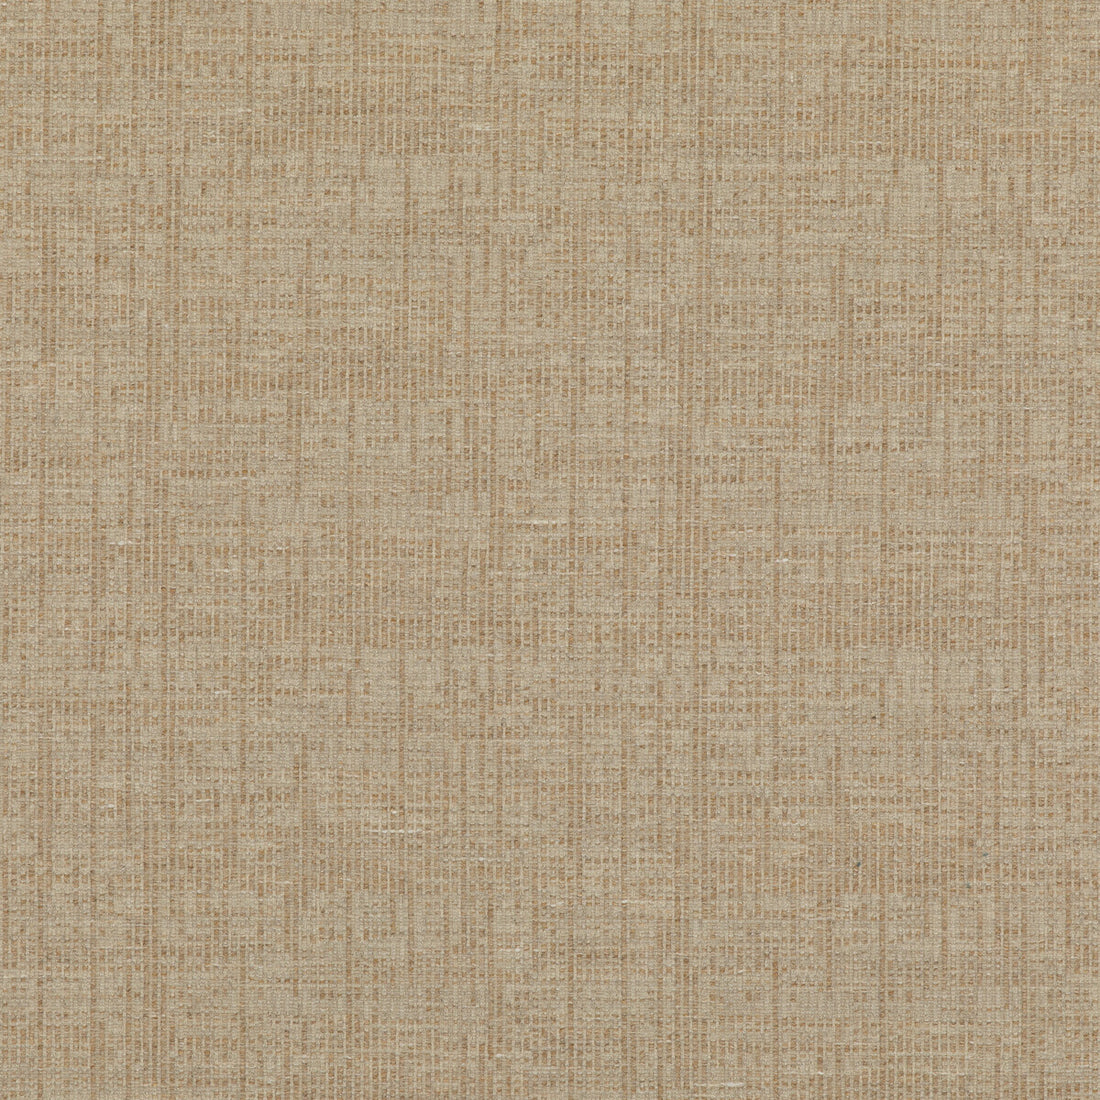 Umbra fabric in sand color - pattern ED85327.130.0 - by Threads in the Luxury Weaves II collection